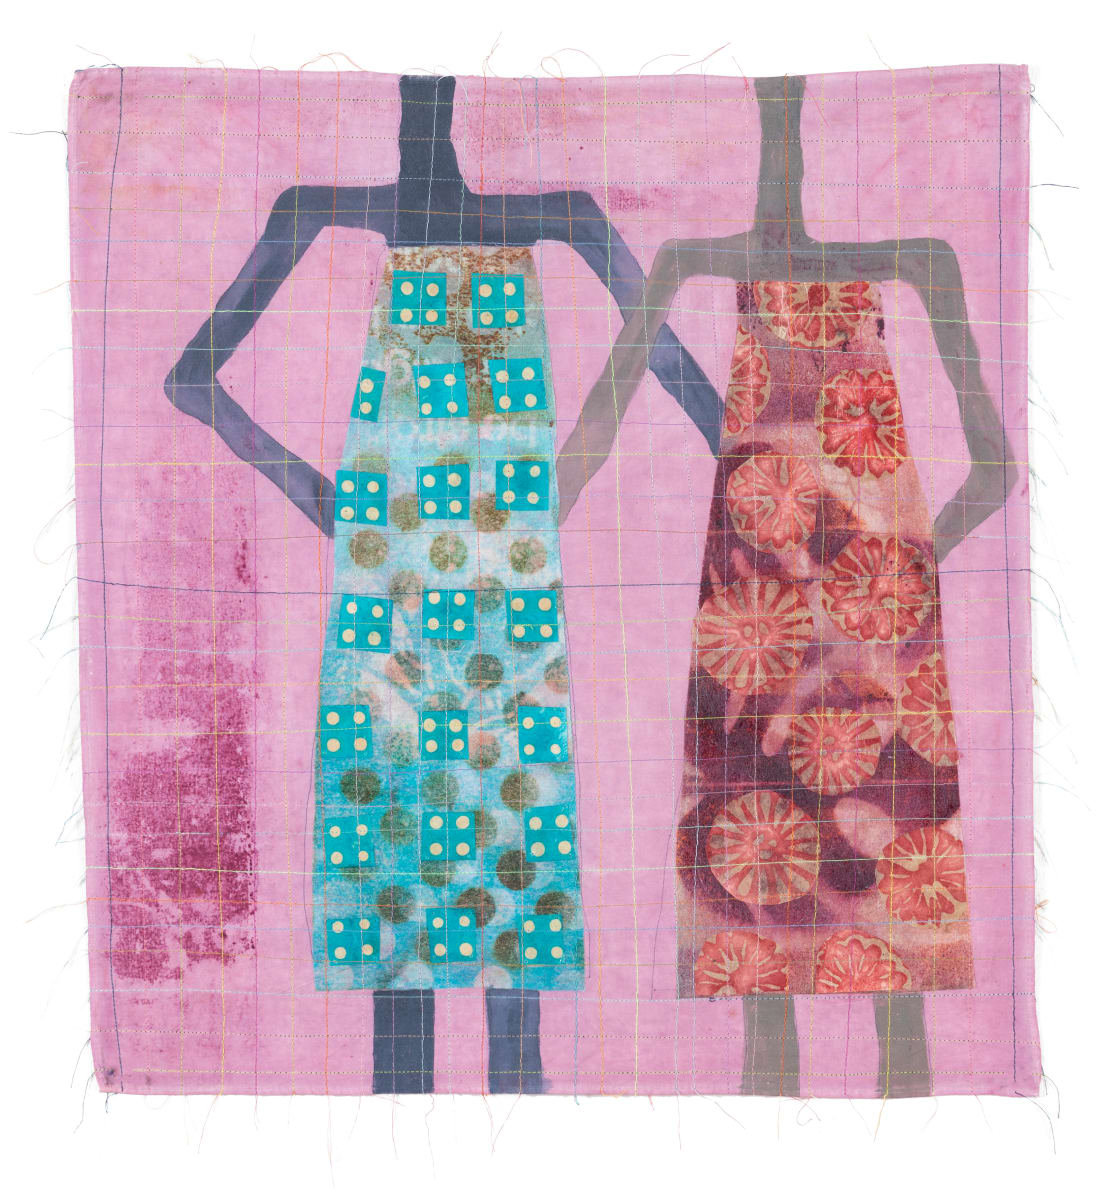 Figurative Cloth Collage 4 by Hollie Heller 